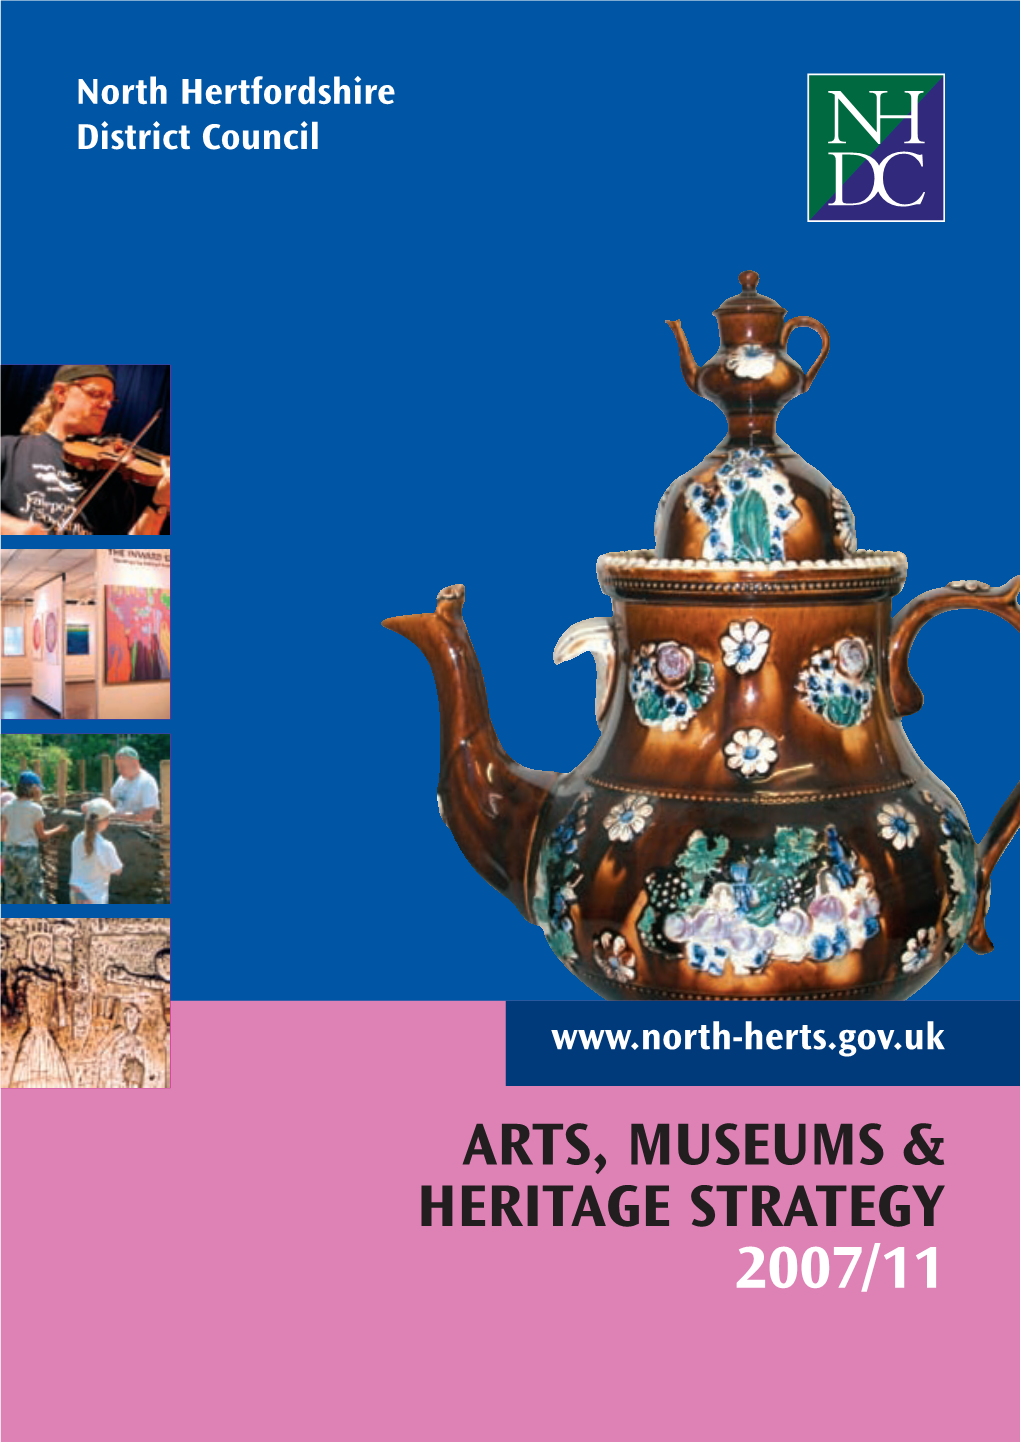 Arts, Museums & Heritage Strategy 2007/11